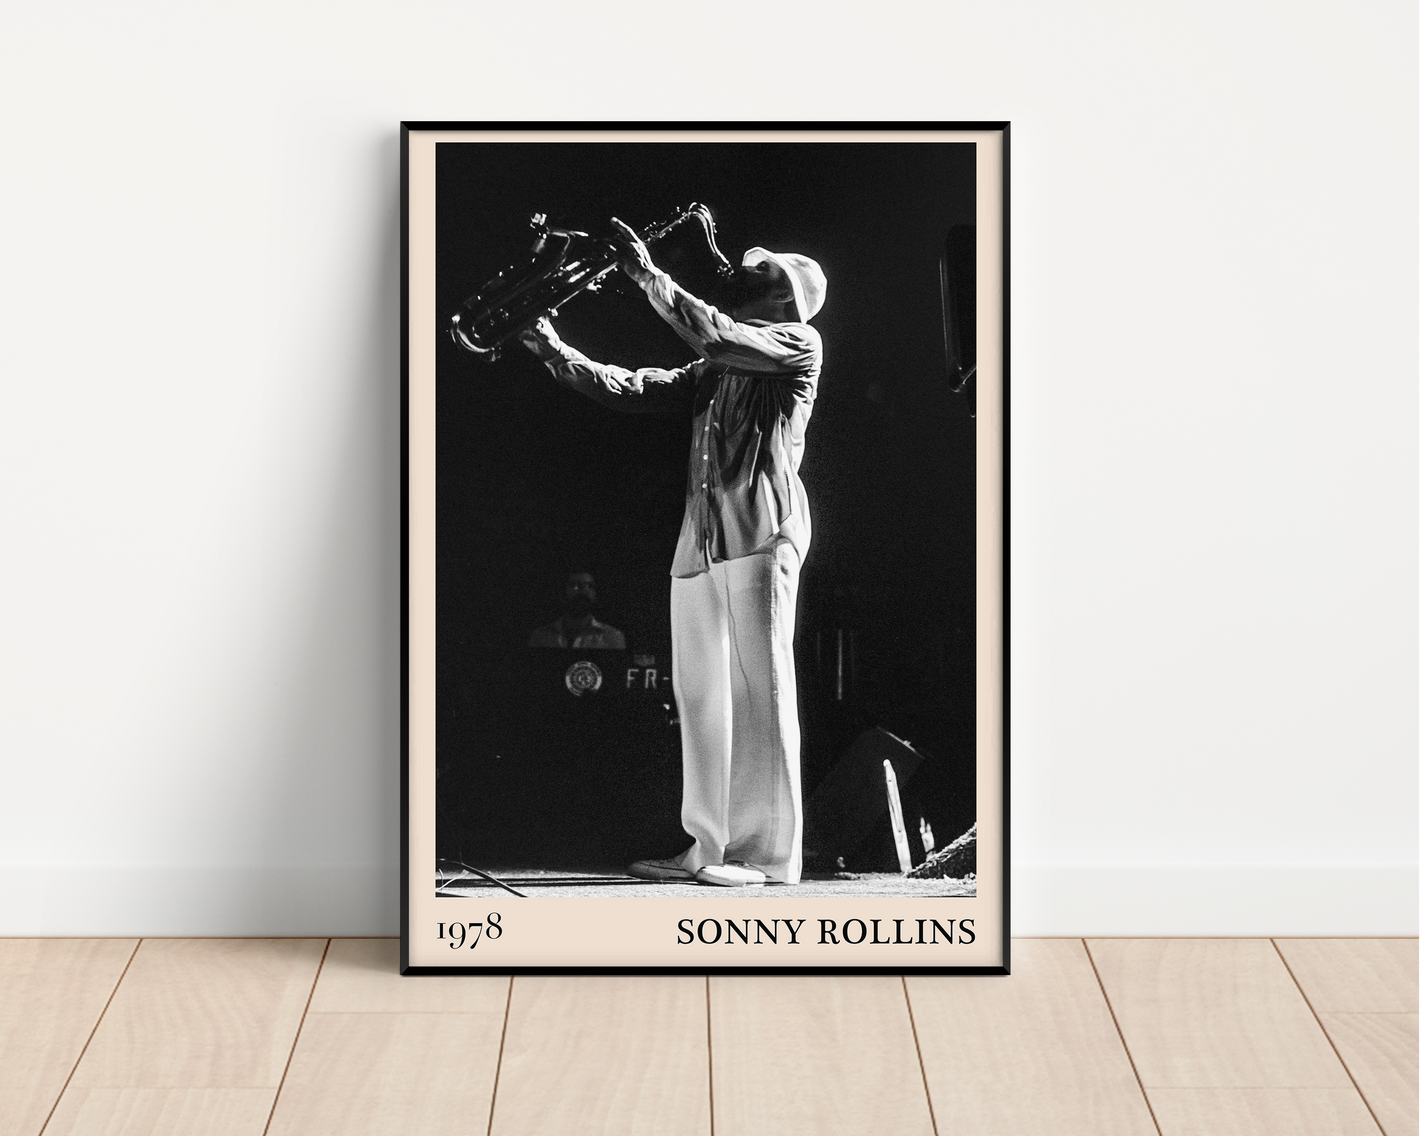 1978 photograph of Sonny Rollins playing the saxophone, transformed into a stylish black-framed jazz poster resting against a white wall